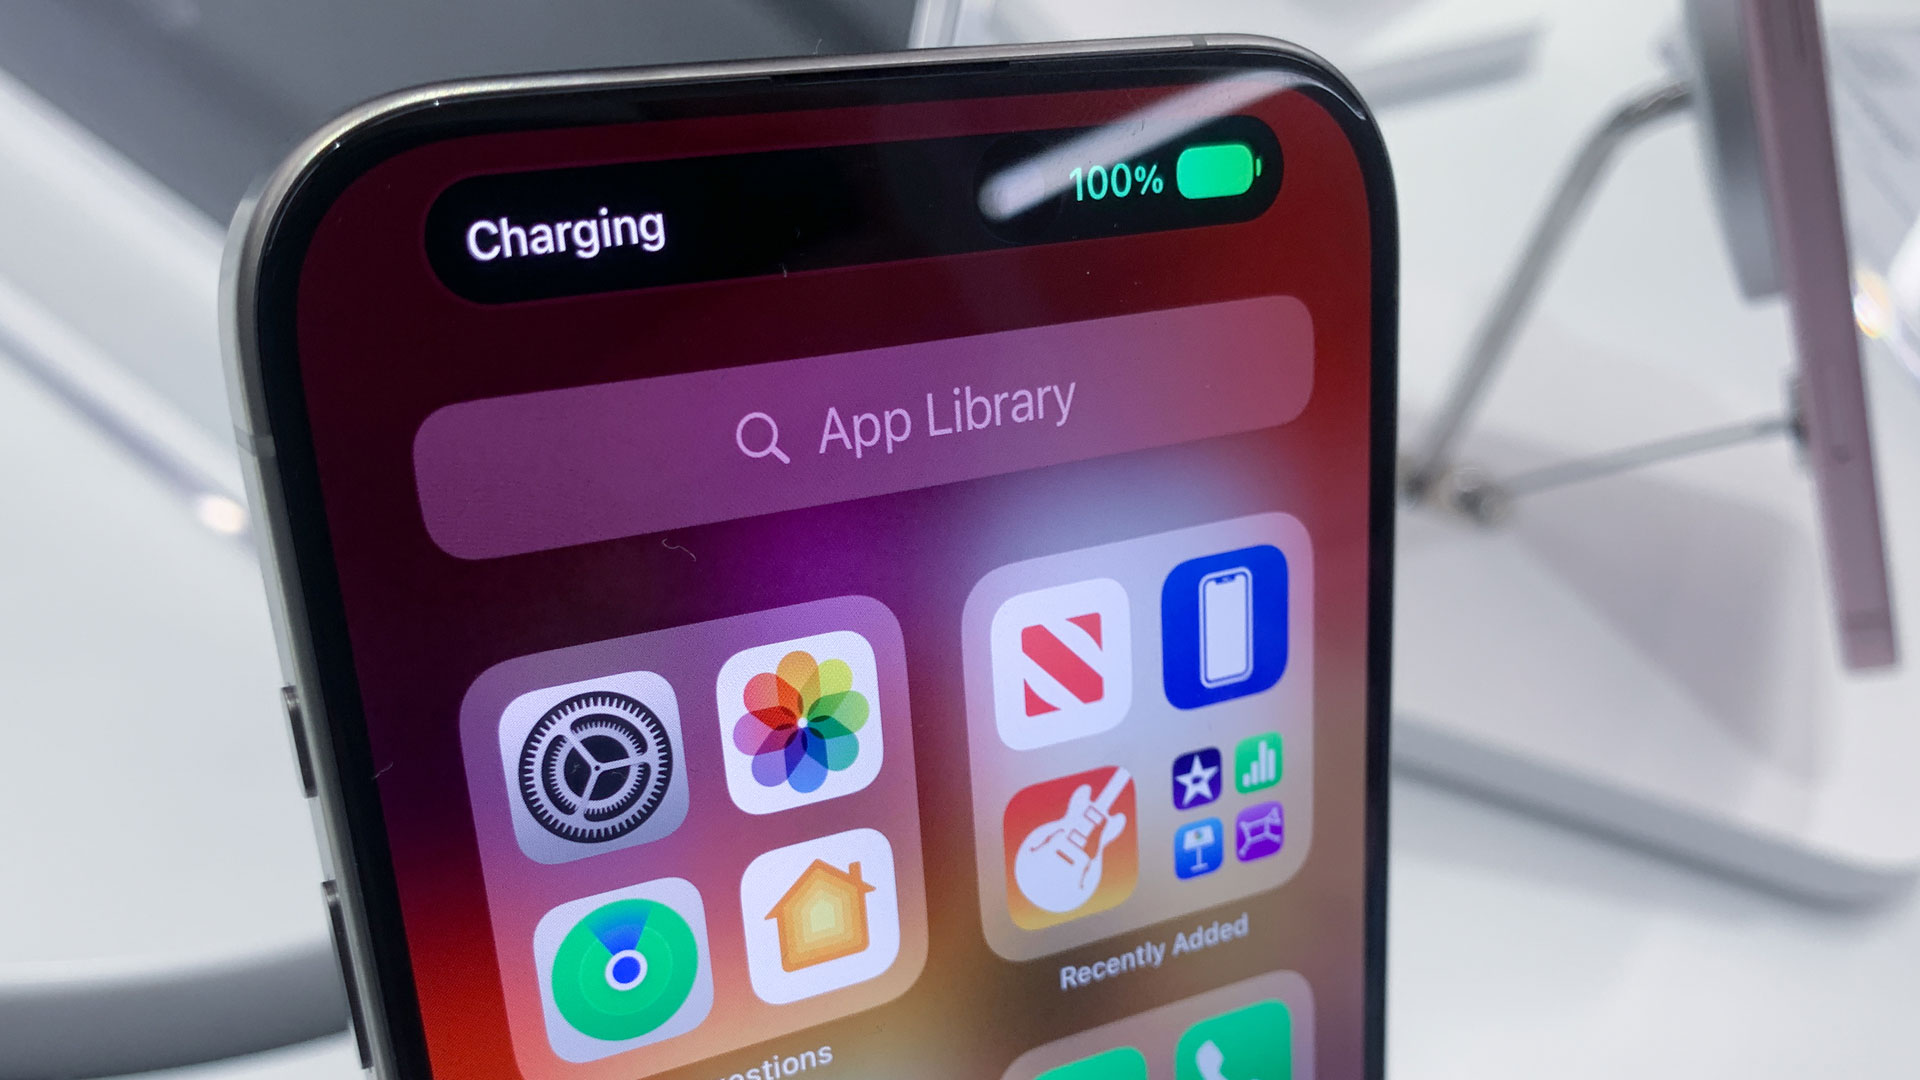 Stop Wasting Time! Learn the Correct Way to Charge Your iPhone and Save Battery Life